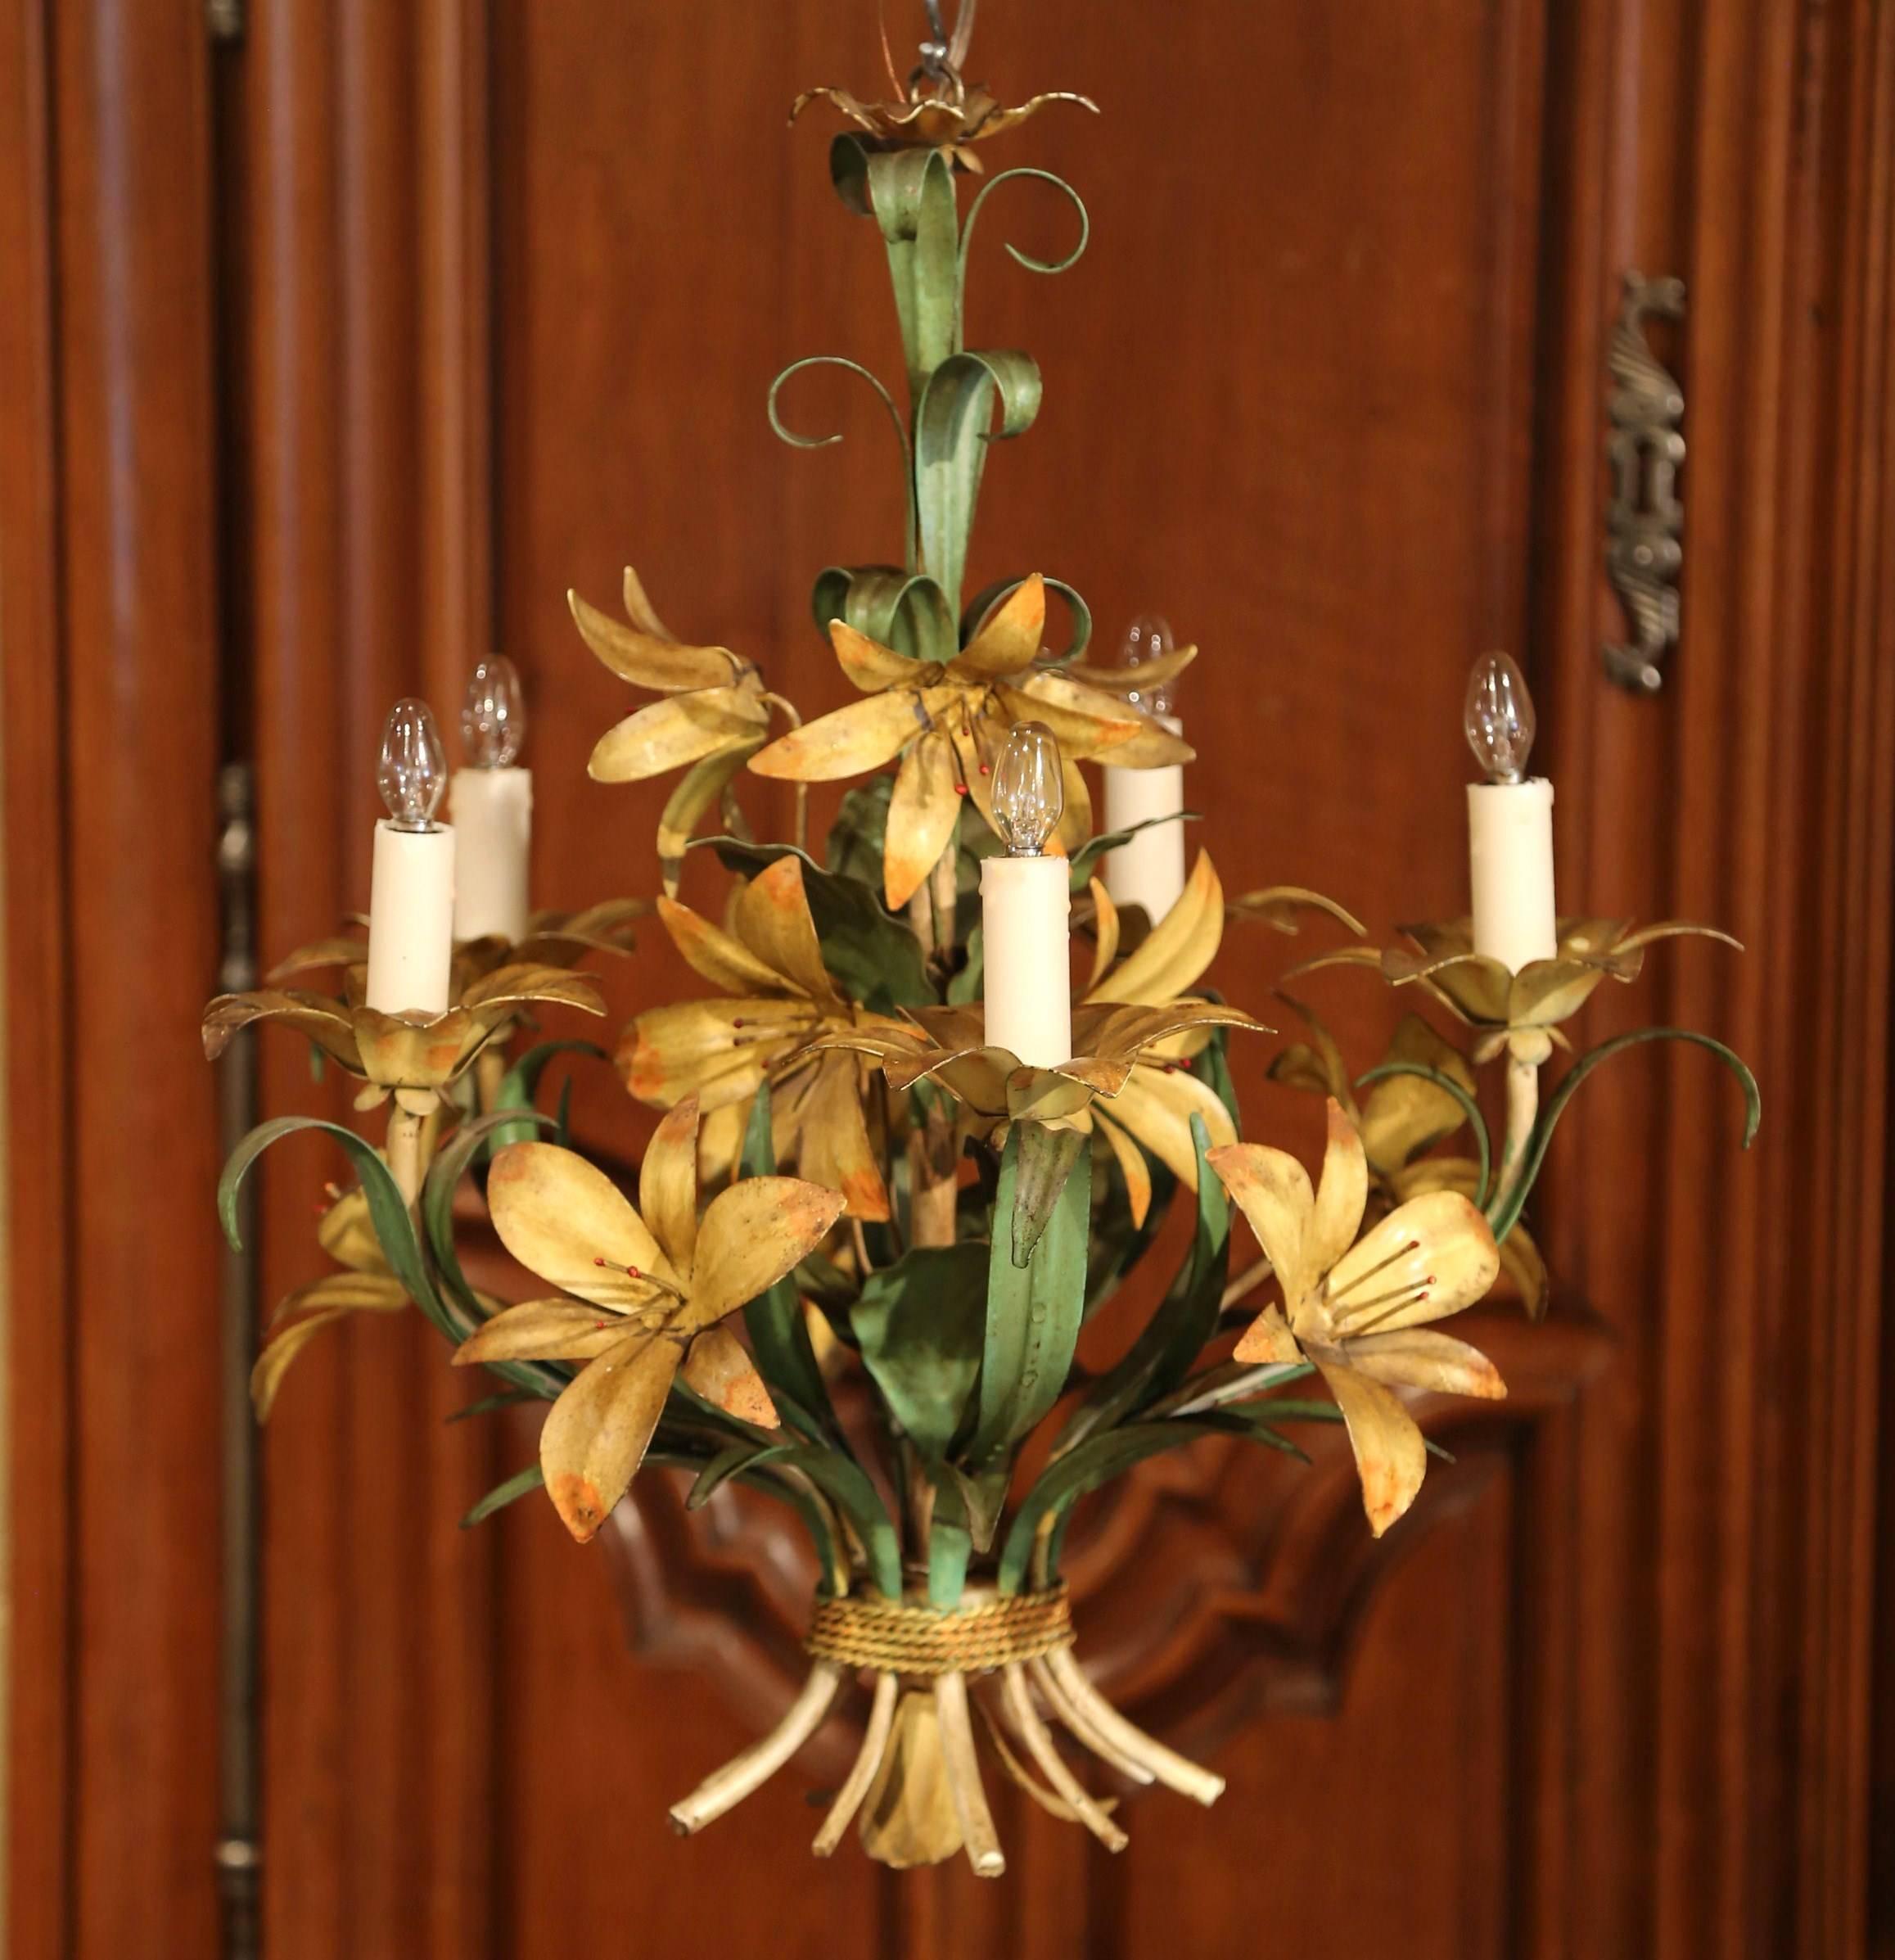 This elegant, antique chandelier was crafted in France, circa 1920. The small, charming hanging light fixture has five-light and is embellished with realistic orange lily flowers and green leaves. The round chandelier is in excellent condition and